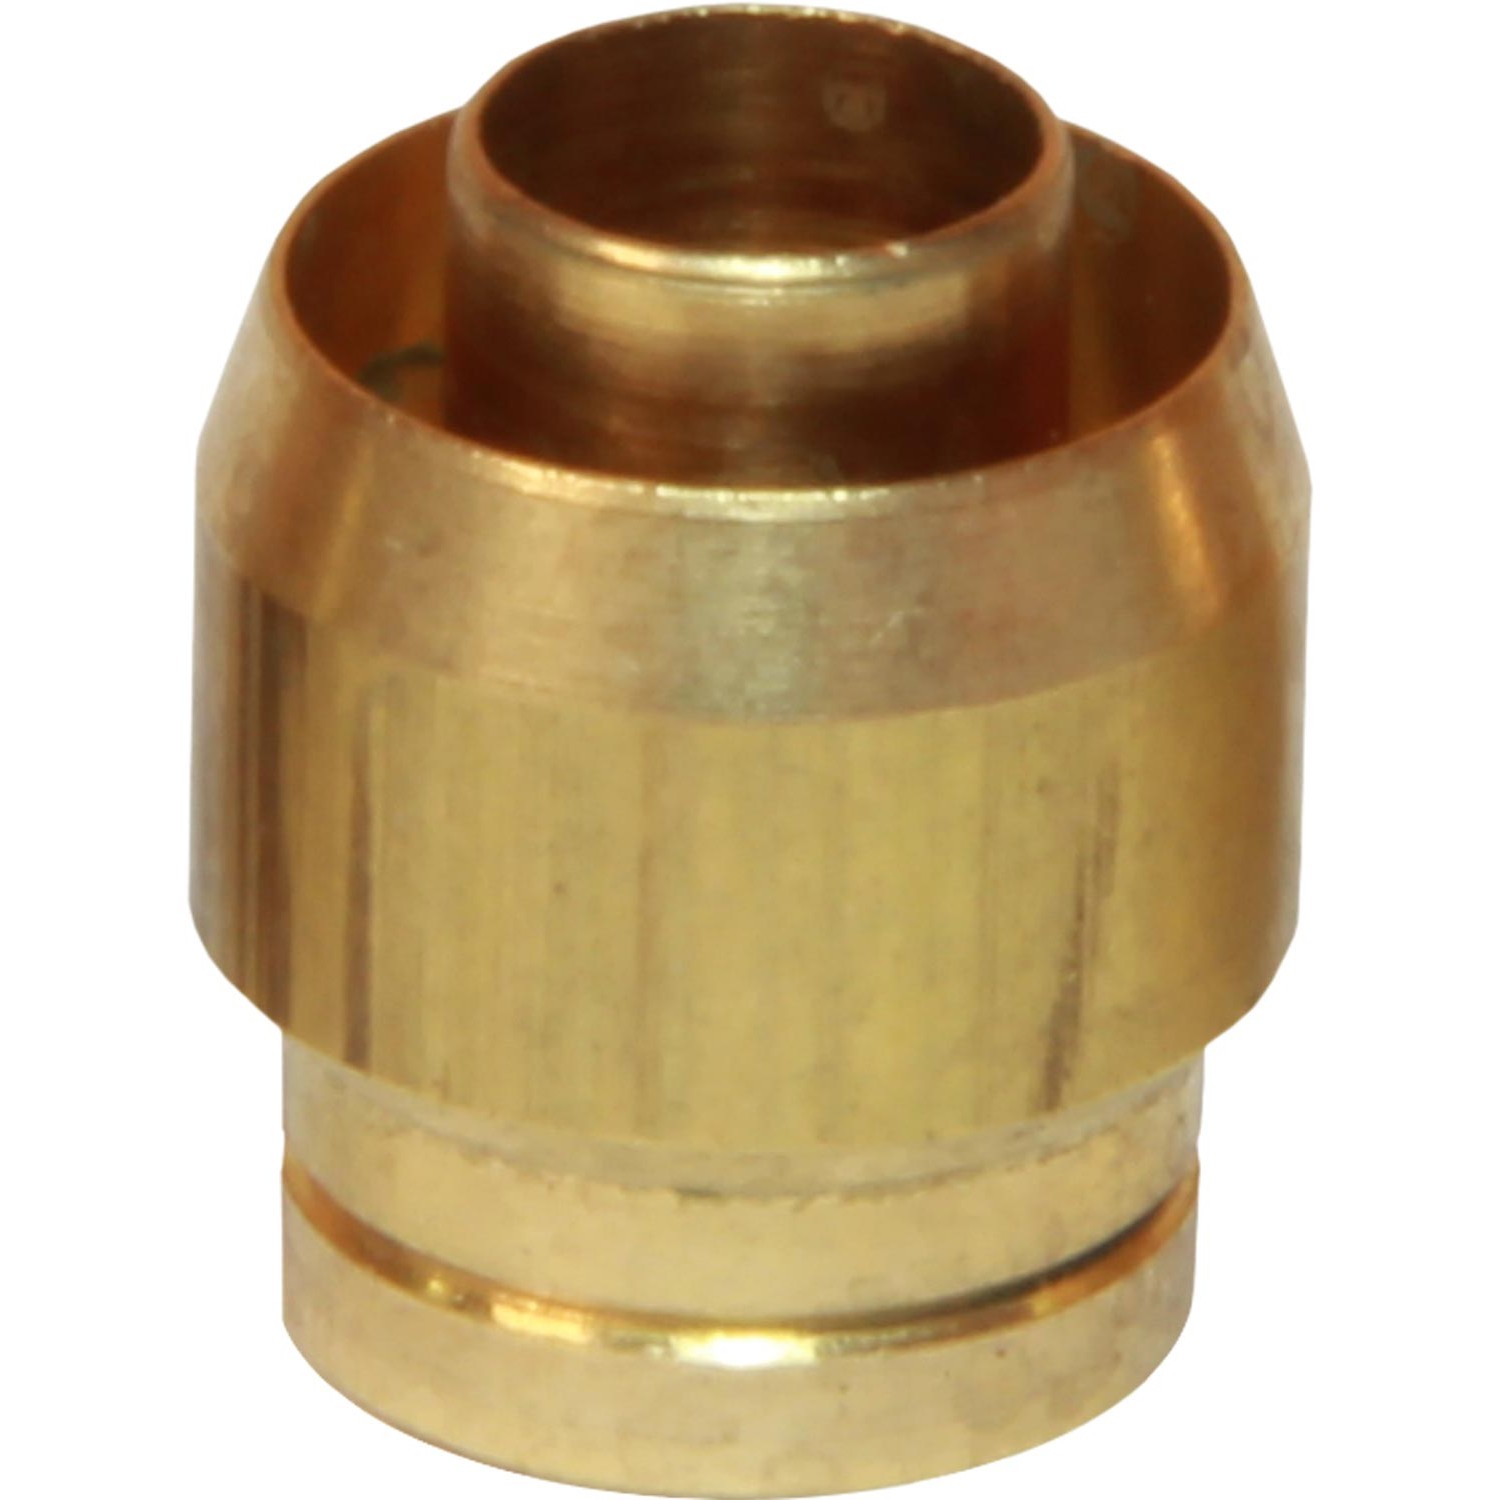 Five 6mm x 10mm Brass olive and nut for copper pipe NG LPG compression fitting 